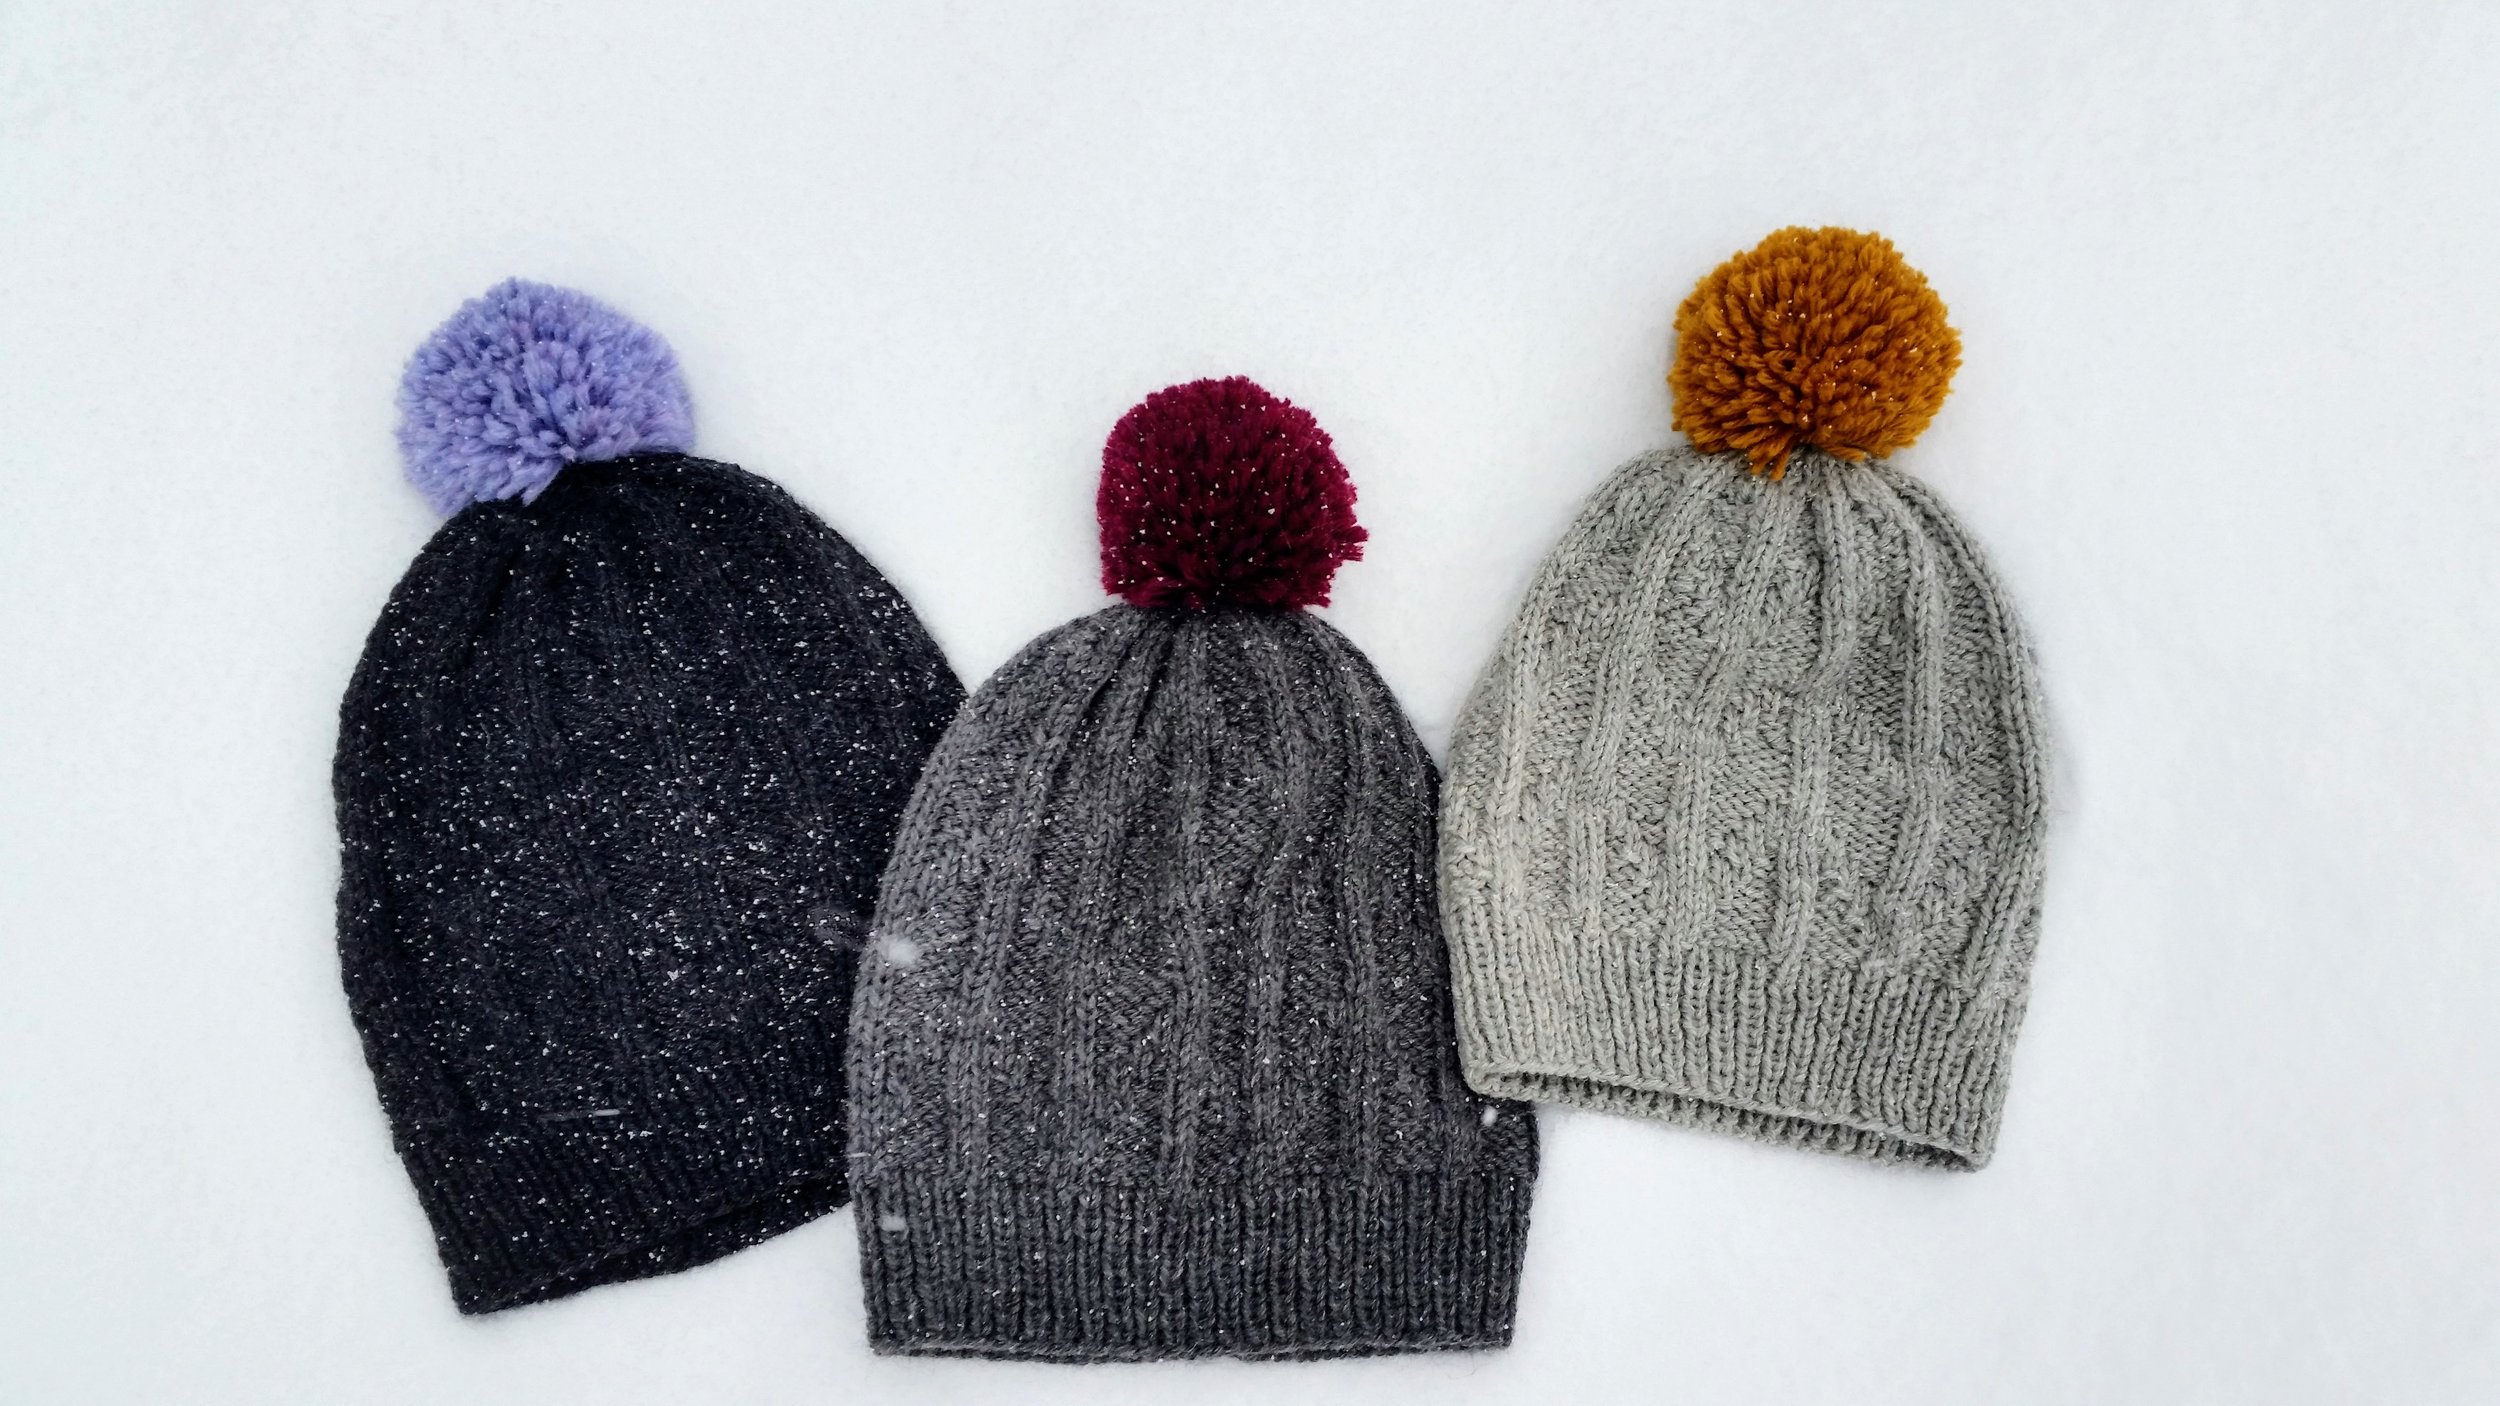 Three grey hats with a knit chevron texture and colourful pom-poms lie in the snow.